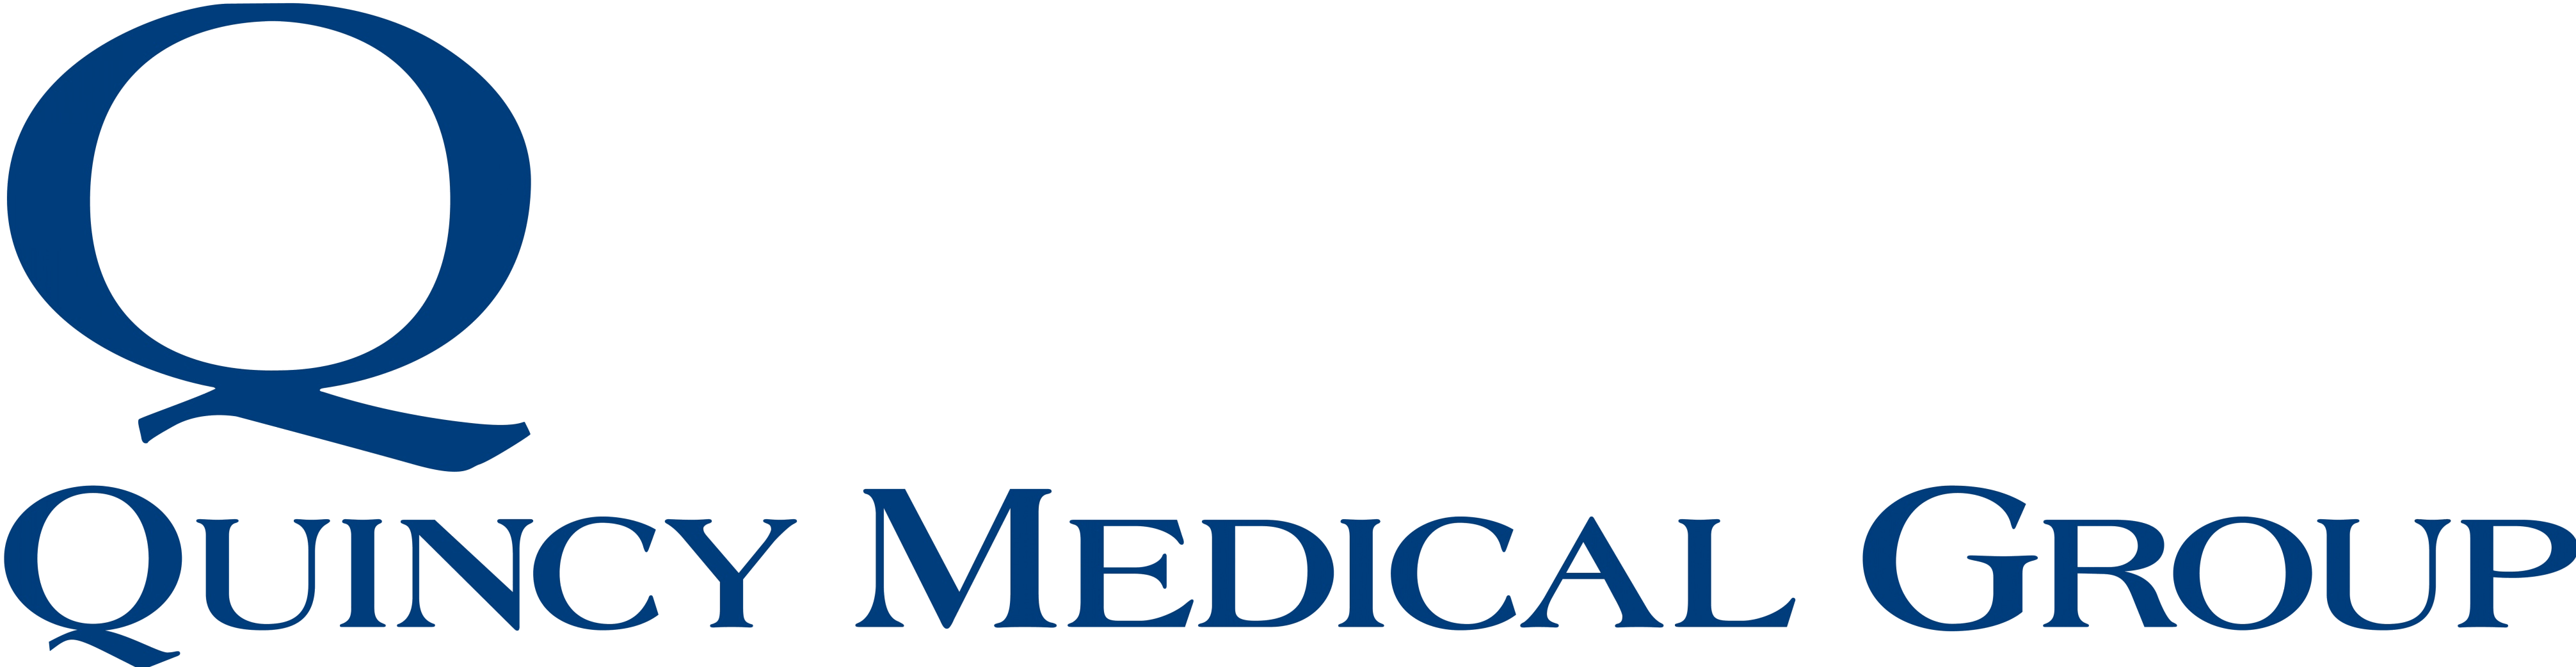 Quincy Medical Group_clipped_rev_1